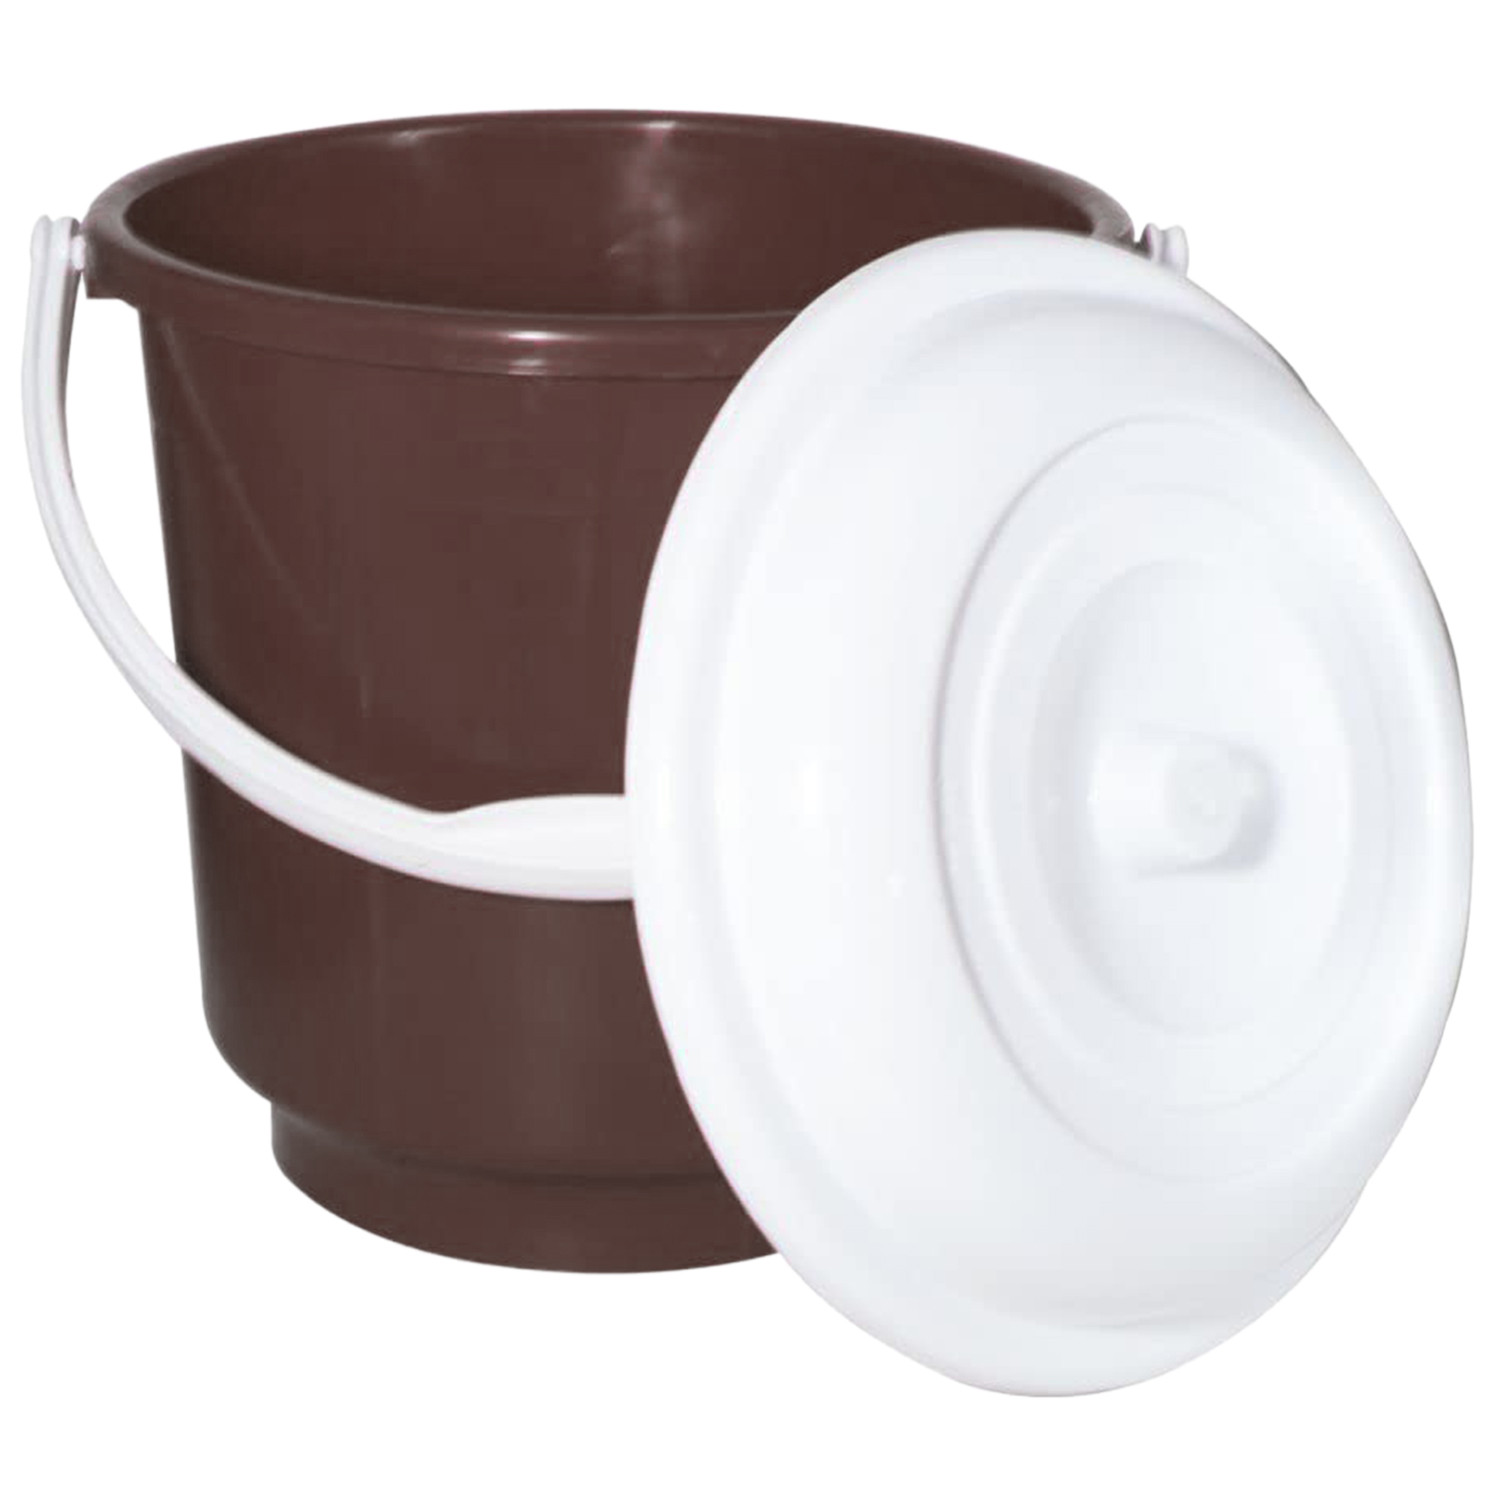 Kuber Industries Multipurposes Plastic Bucket For Bathing Home Cleaning & Storage Purpose With Lid, 18Ltr. (Brown)-47KM01165